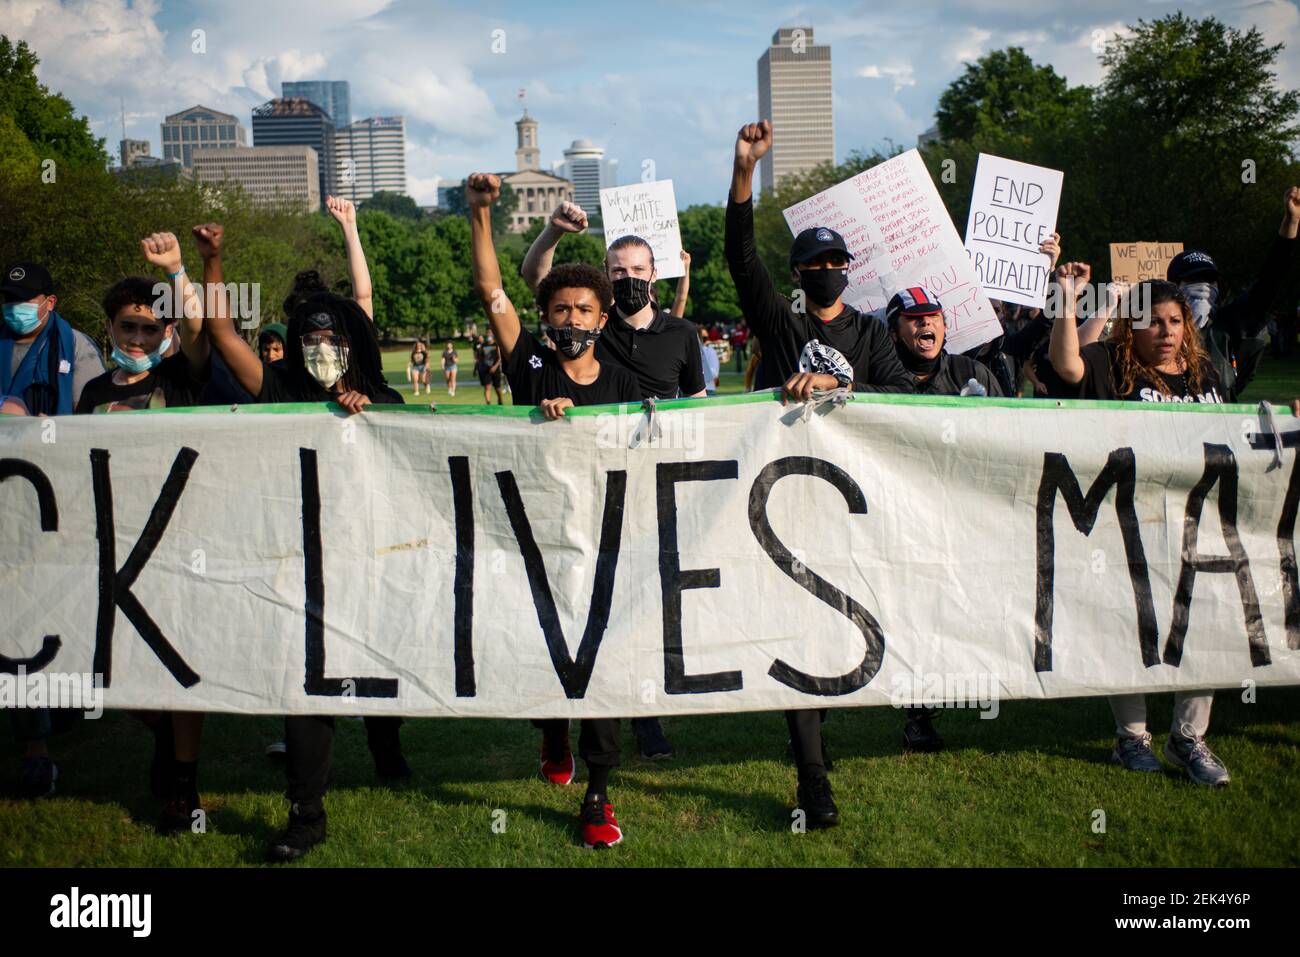 Demonstrators return to Bicentennial Park during a protest organized by  Teens for Equality, a student-led organization in Nashville, Tenn., on June  4, 2020. Thousands of people marched in protest against police violence